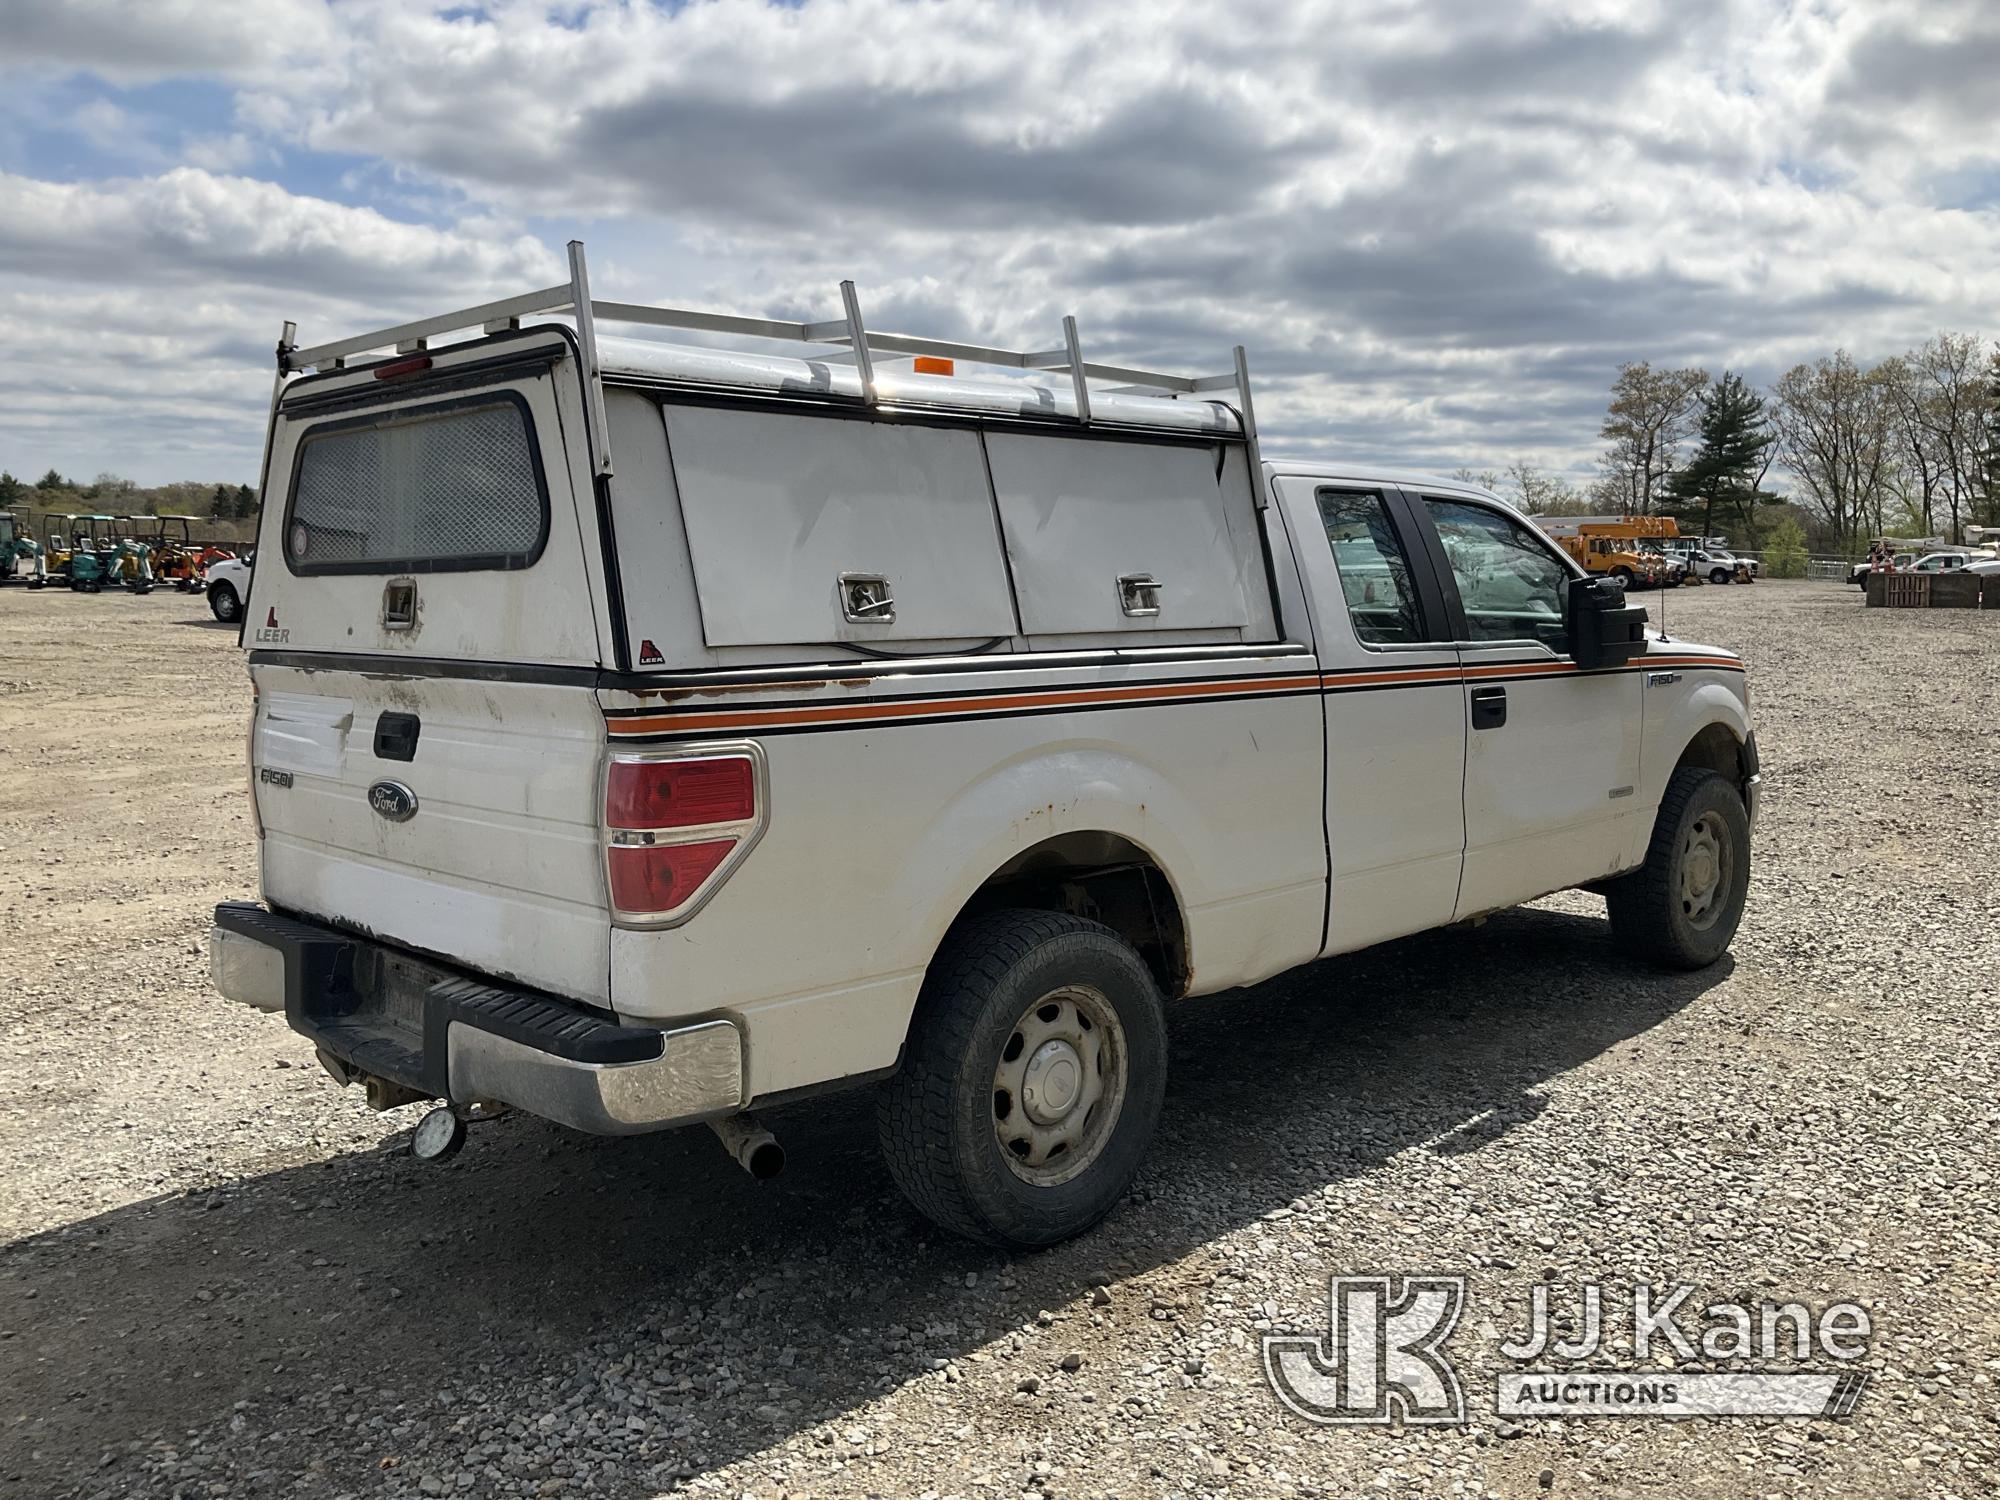 (Shrewsbury, MA) 2014 Ford F150 4x4 Extended-Cab Pickup Truck Runs & Moves) (Check Engine Light On,